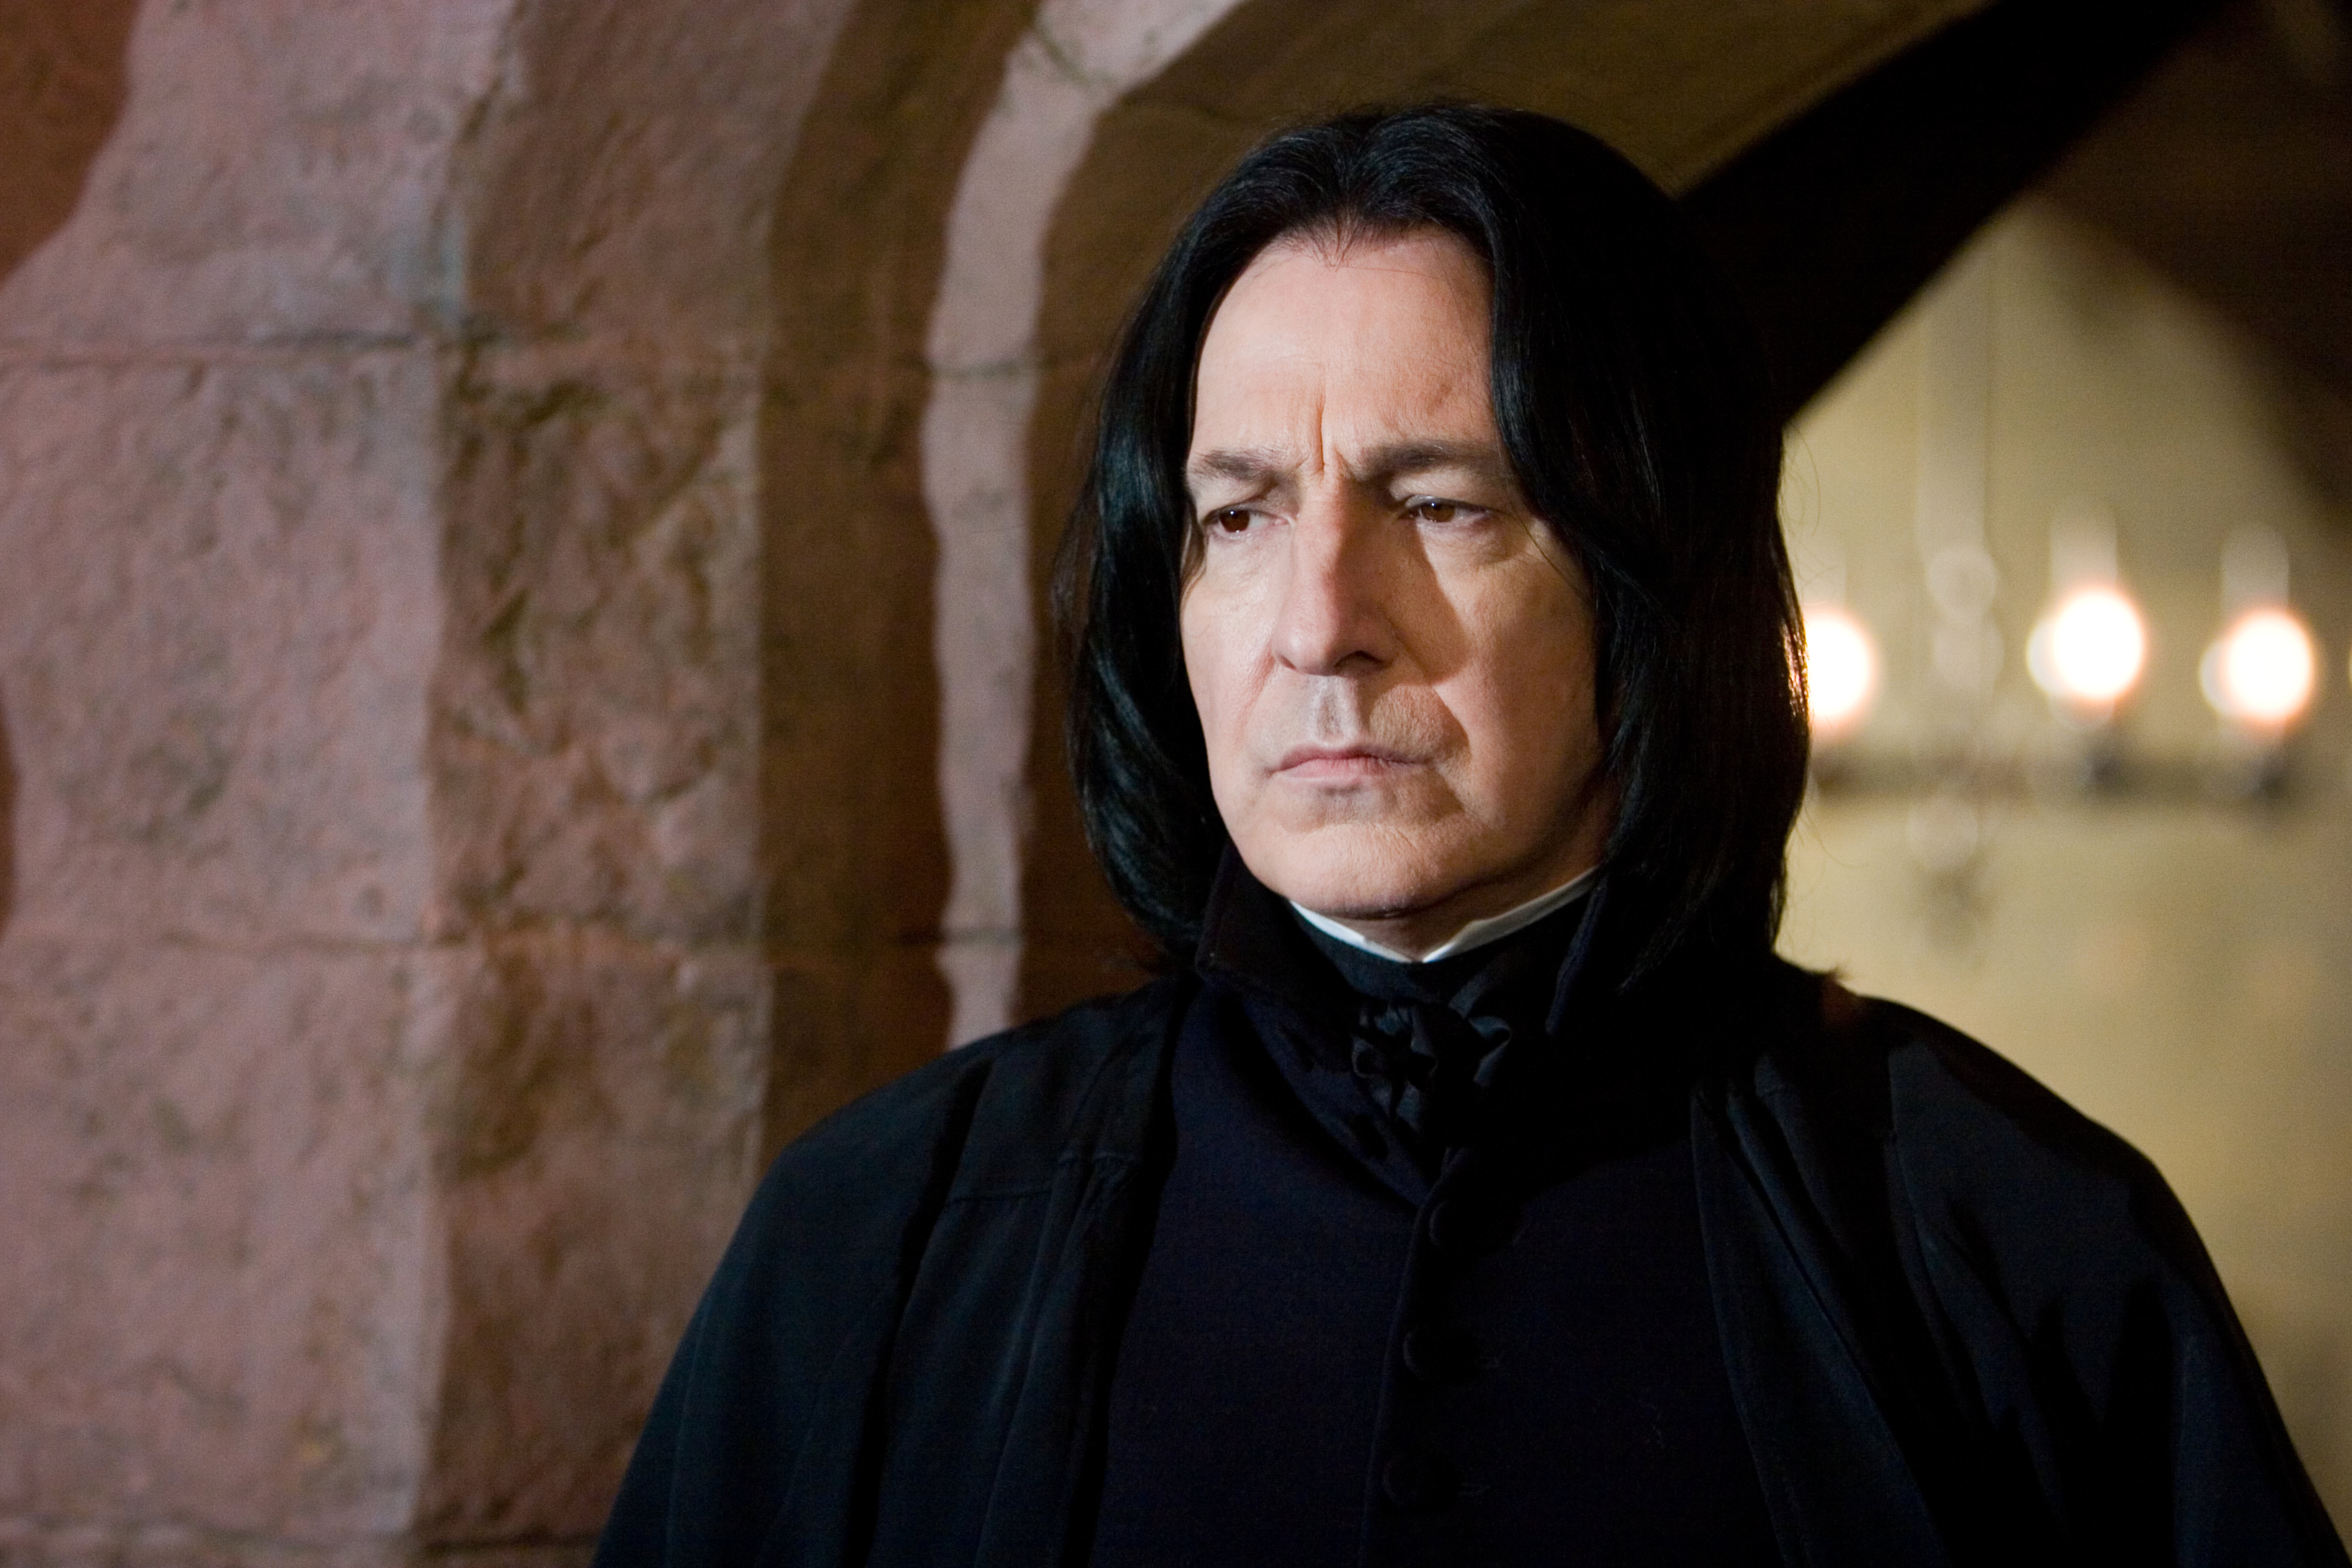 Snape headshot from the Order of the Pheonix 